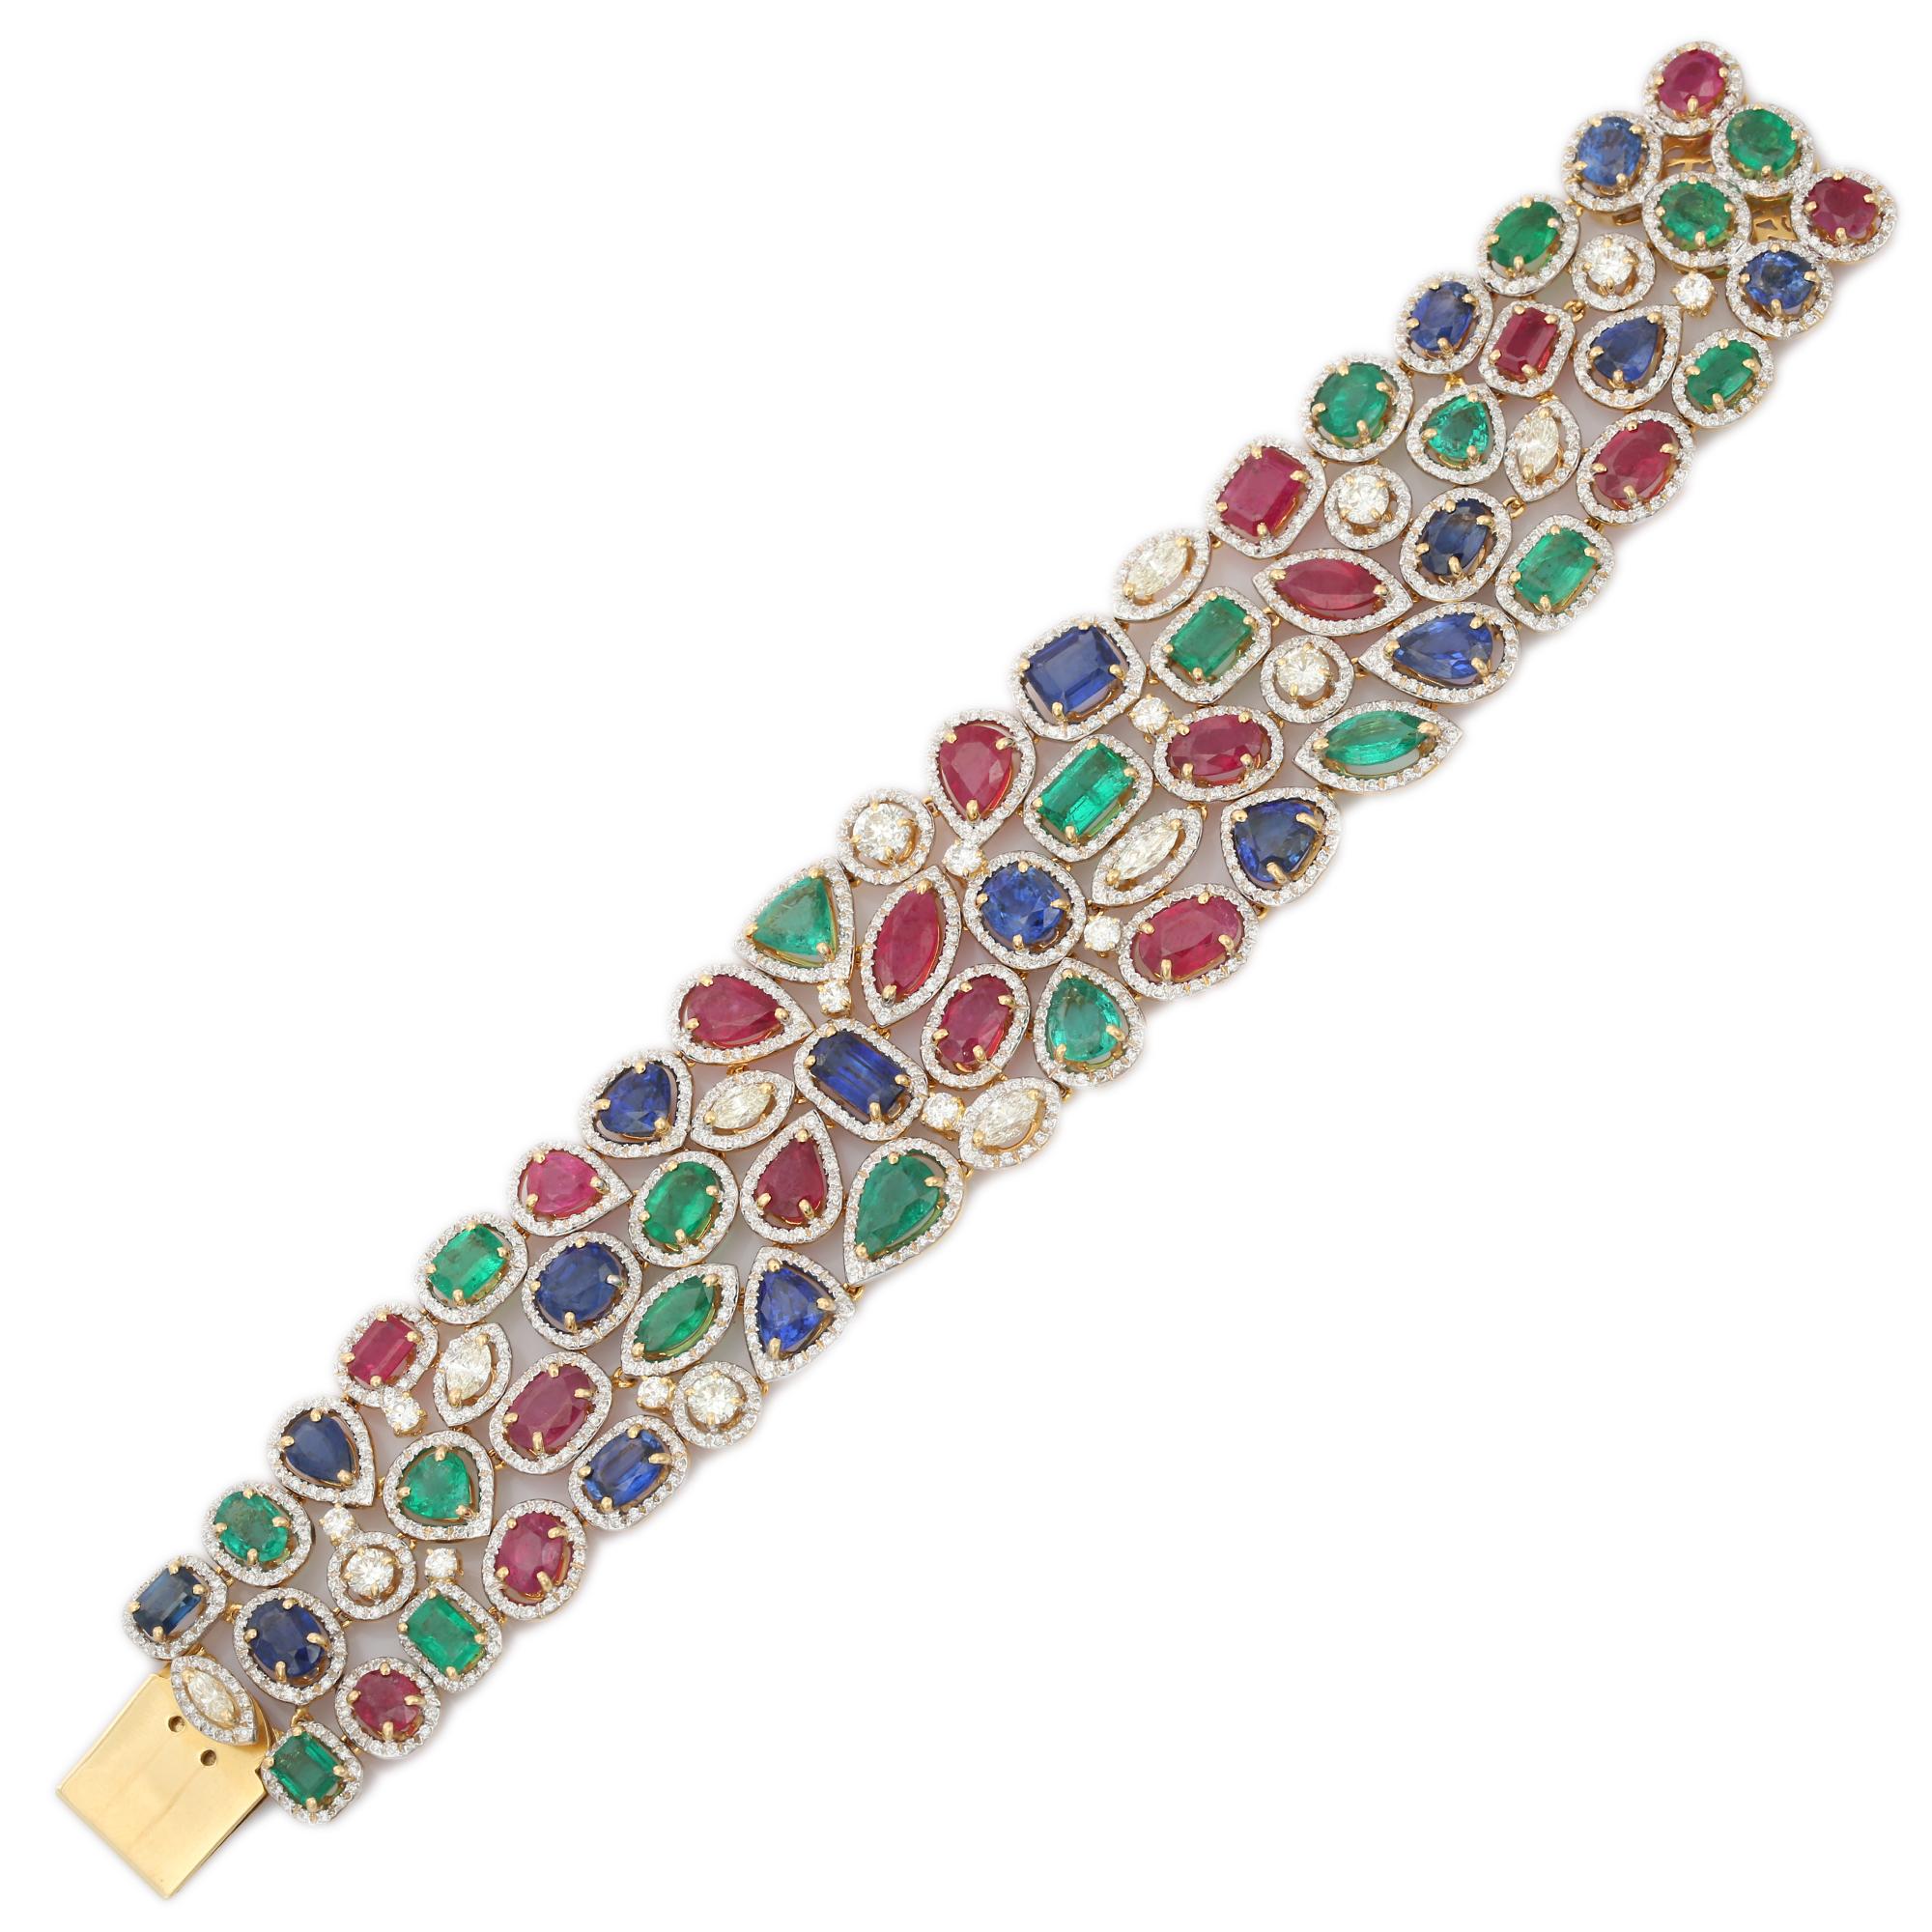 This Glorious 54.5 ct Emerald Ruby Sapphire Bracelet with Diamonds in 18K gold showcases 55 endlessly sparkling natural emerald, ruby and sapphire weighing 54.5 carats with diamonds of 8.4 carats. It measures 7.5 inches long in length. 
Emerald